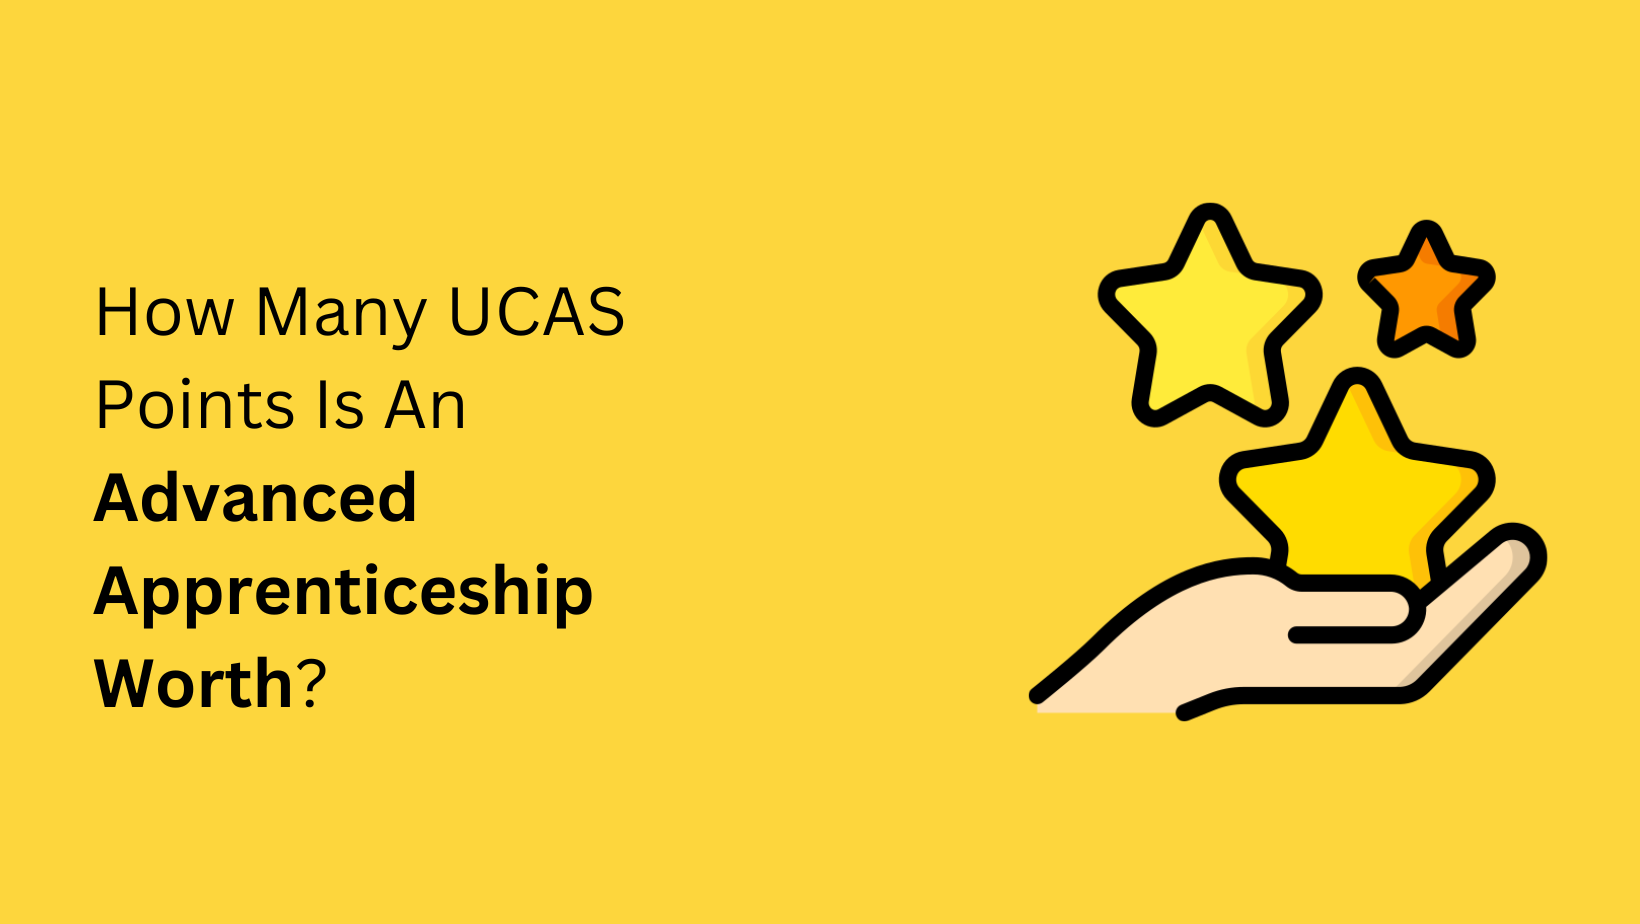 How Many UCAS Points Is An Advanced Apprenticeship Worth